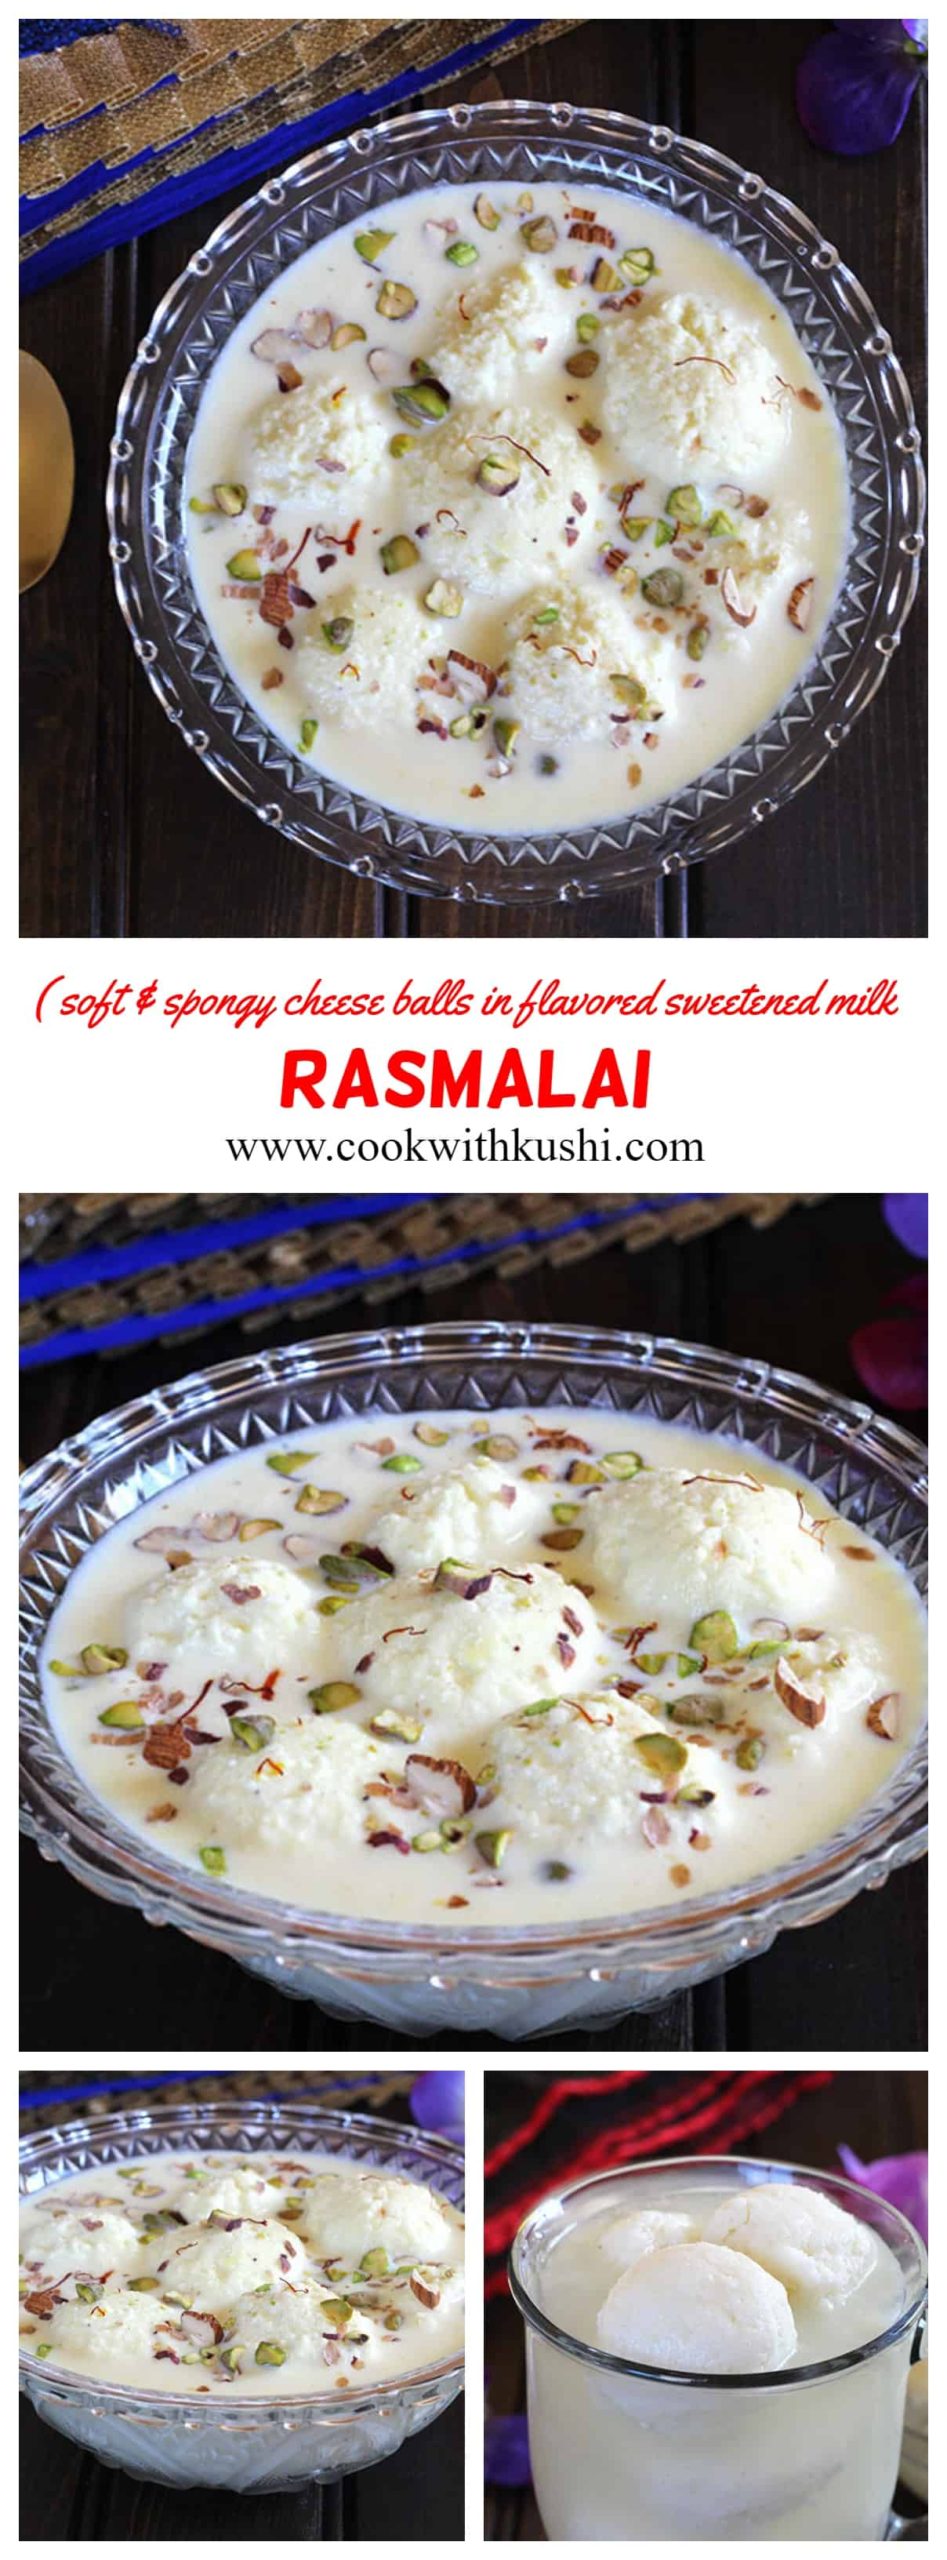 Rasmalai is a super delicious, flavorful and melt in mouth dessert where soft and spongy cheese balls are soaked in saffron flavored sweetened milk (rabri). #rasmalai #indiandesserts #rasgulla #cheeseballs #rabri #rabdi #diwali #indianfestival #indiansweets #homemade #halwai